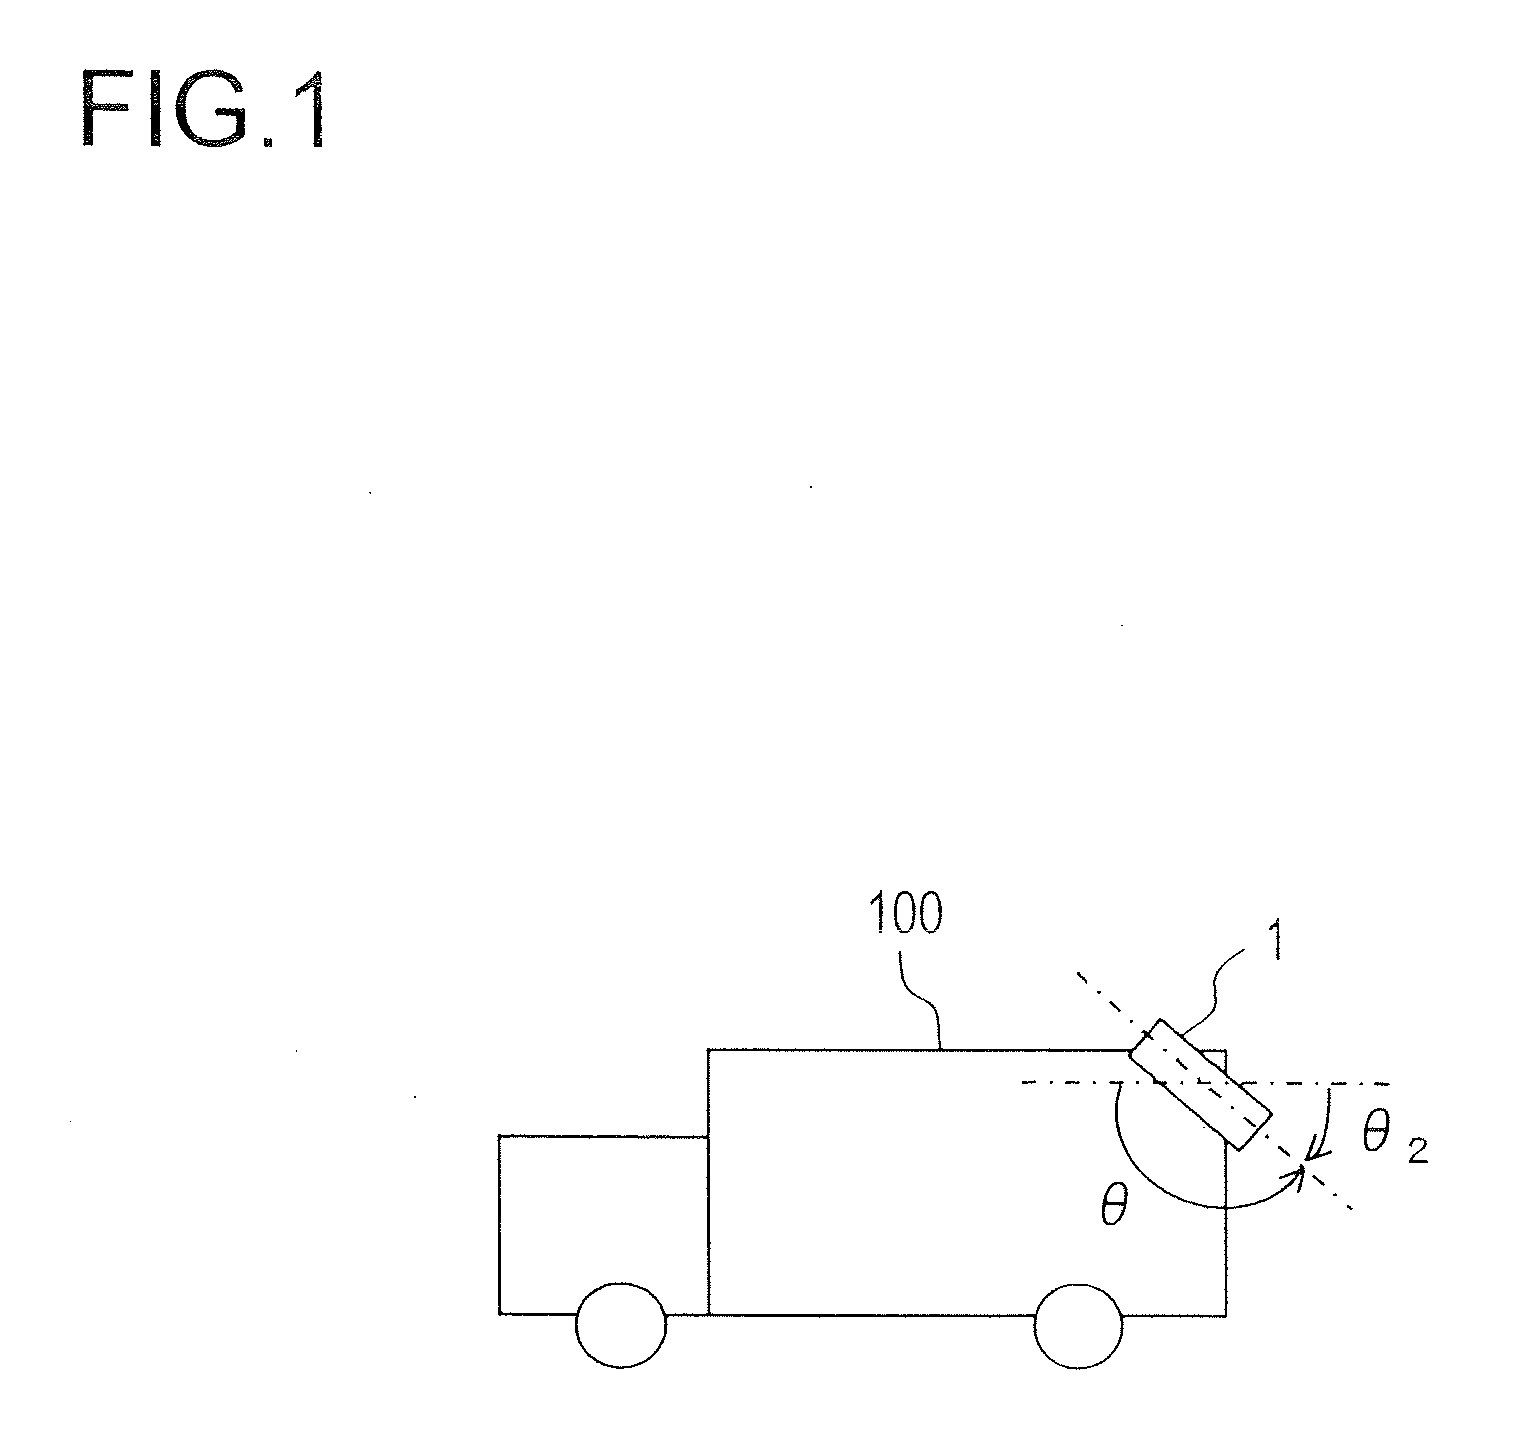 Image processor and visual field support device